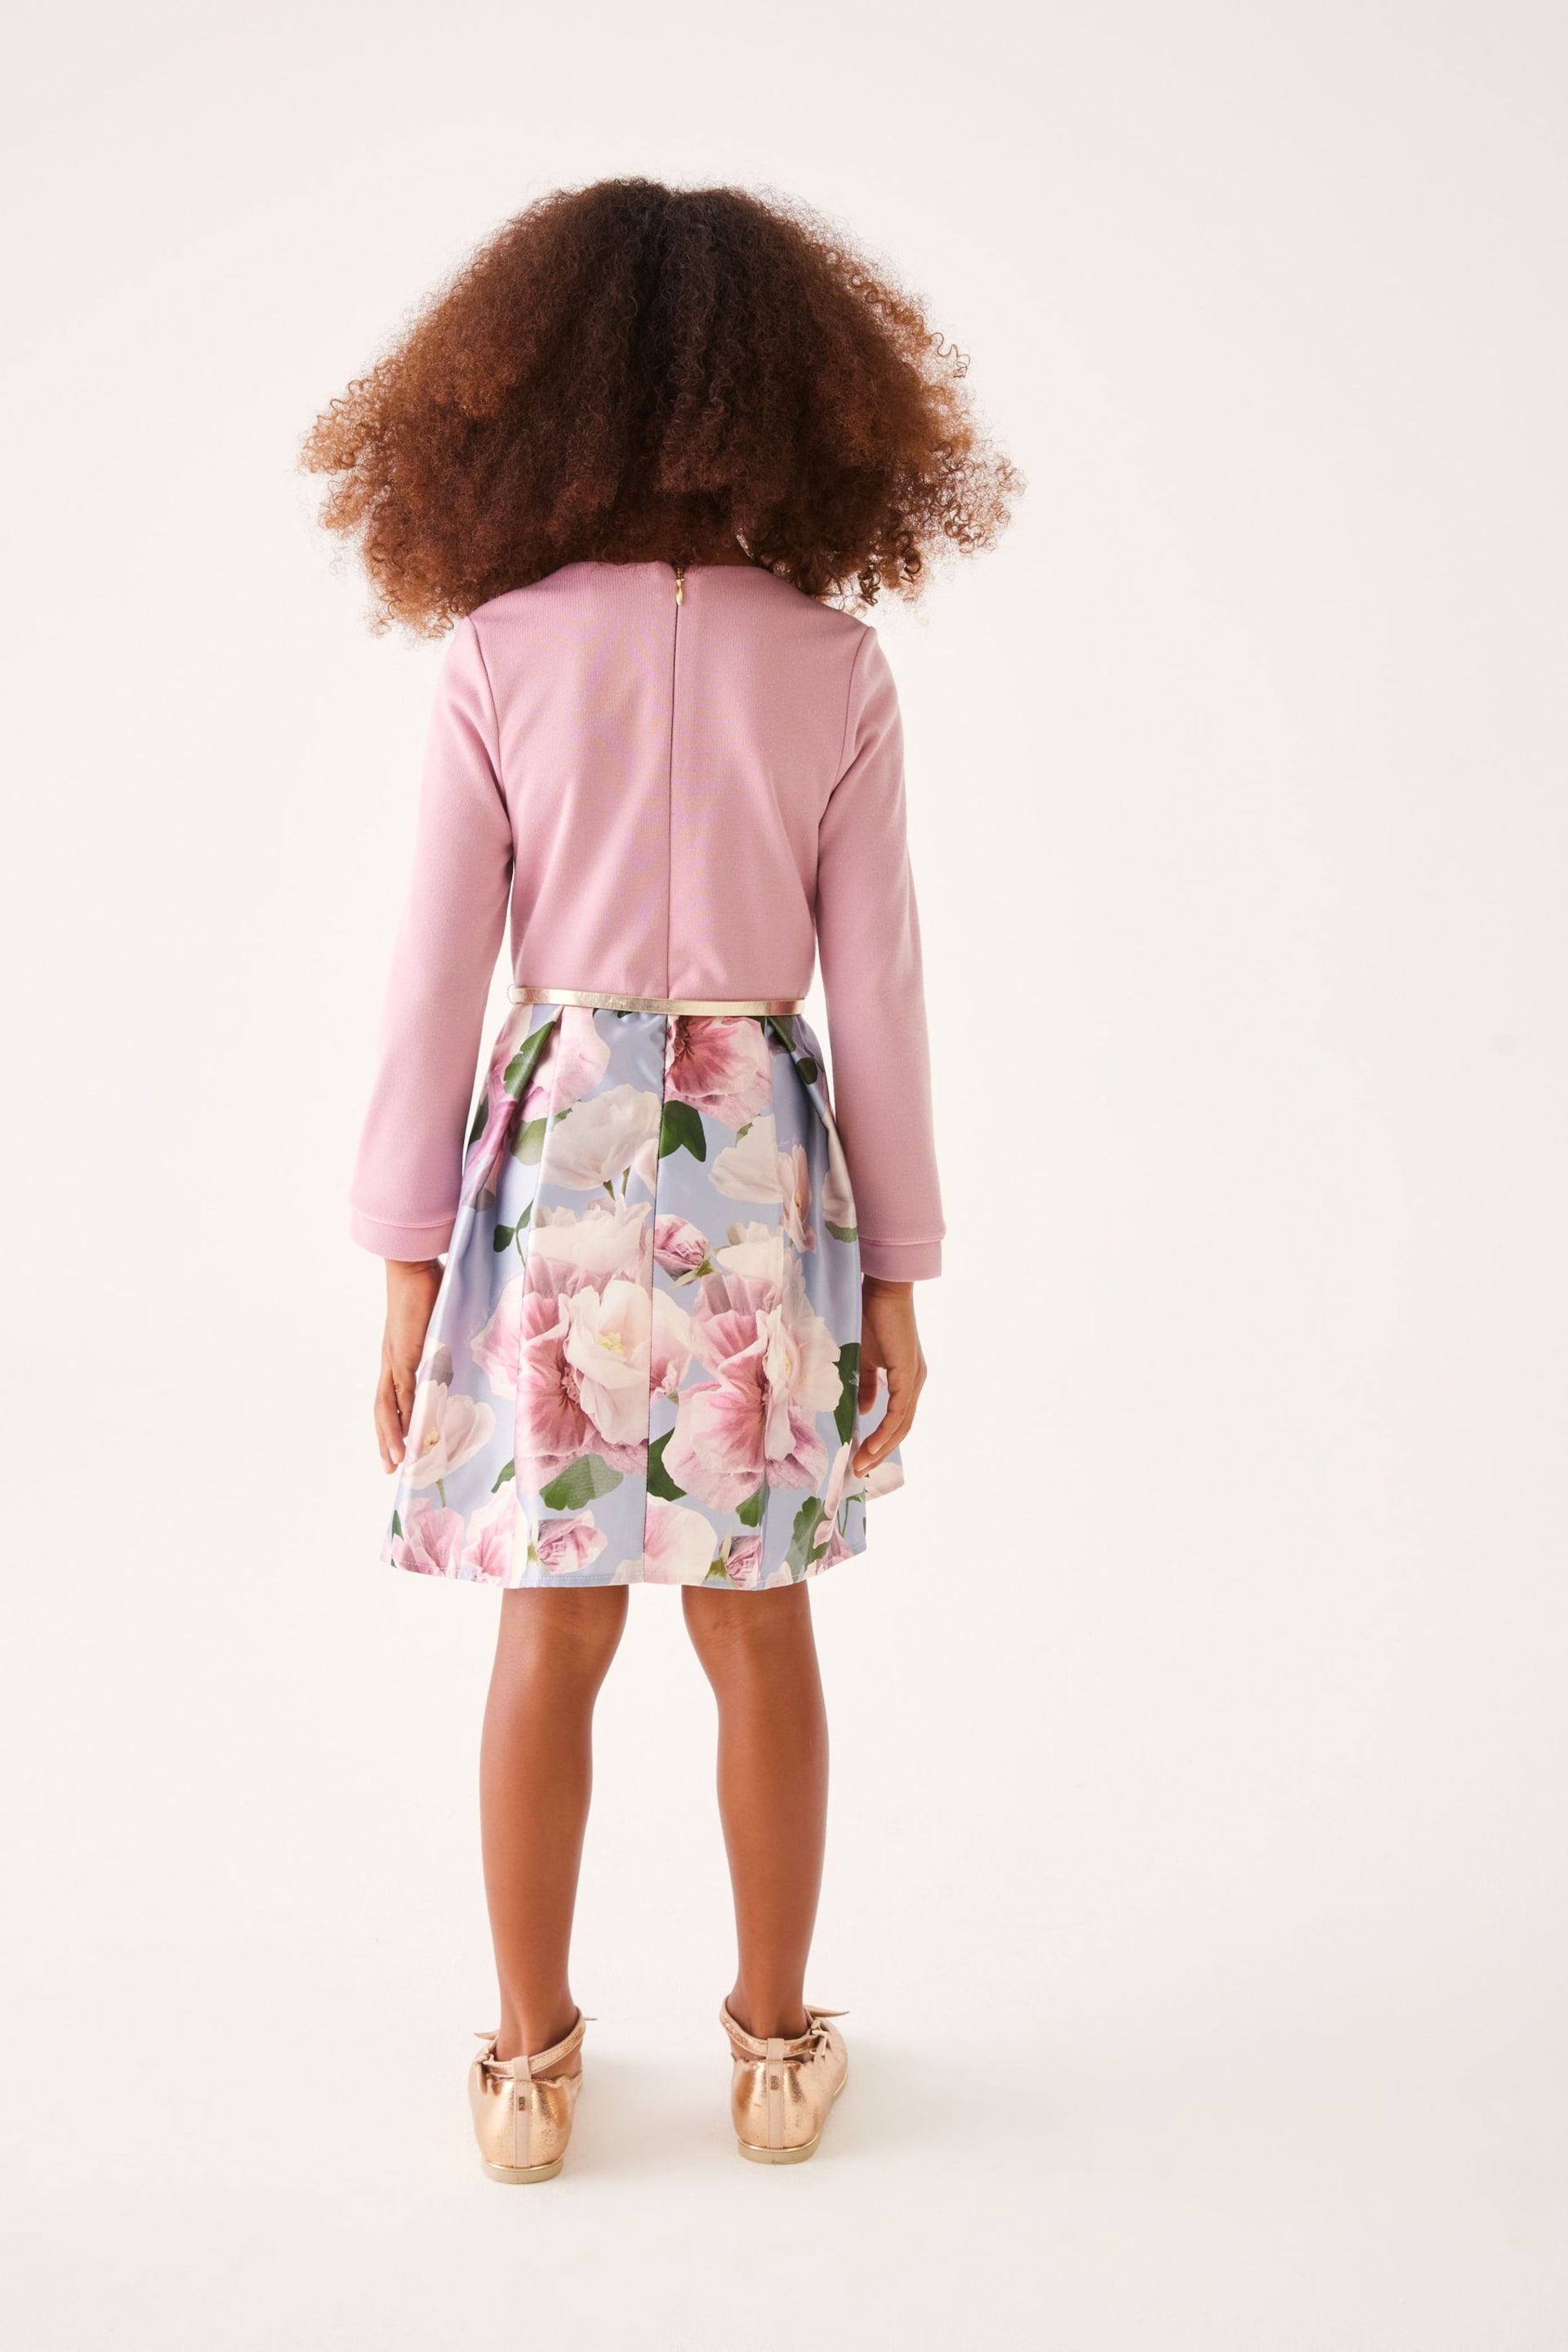 Baker by Ted Baker Pink Long Sleeve Floral Dress - Image 2 of 9